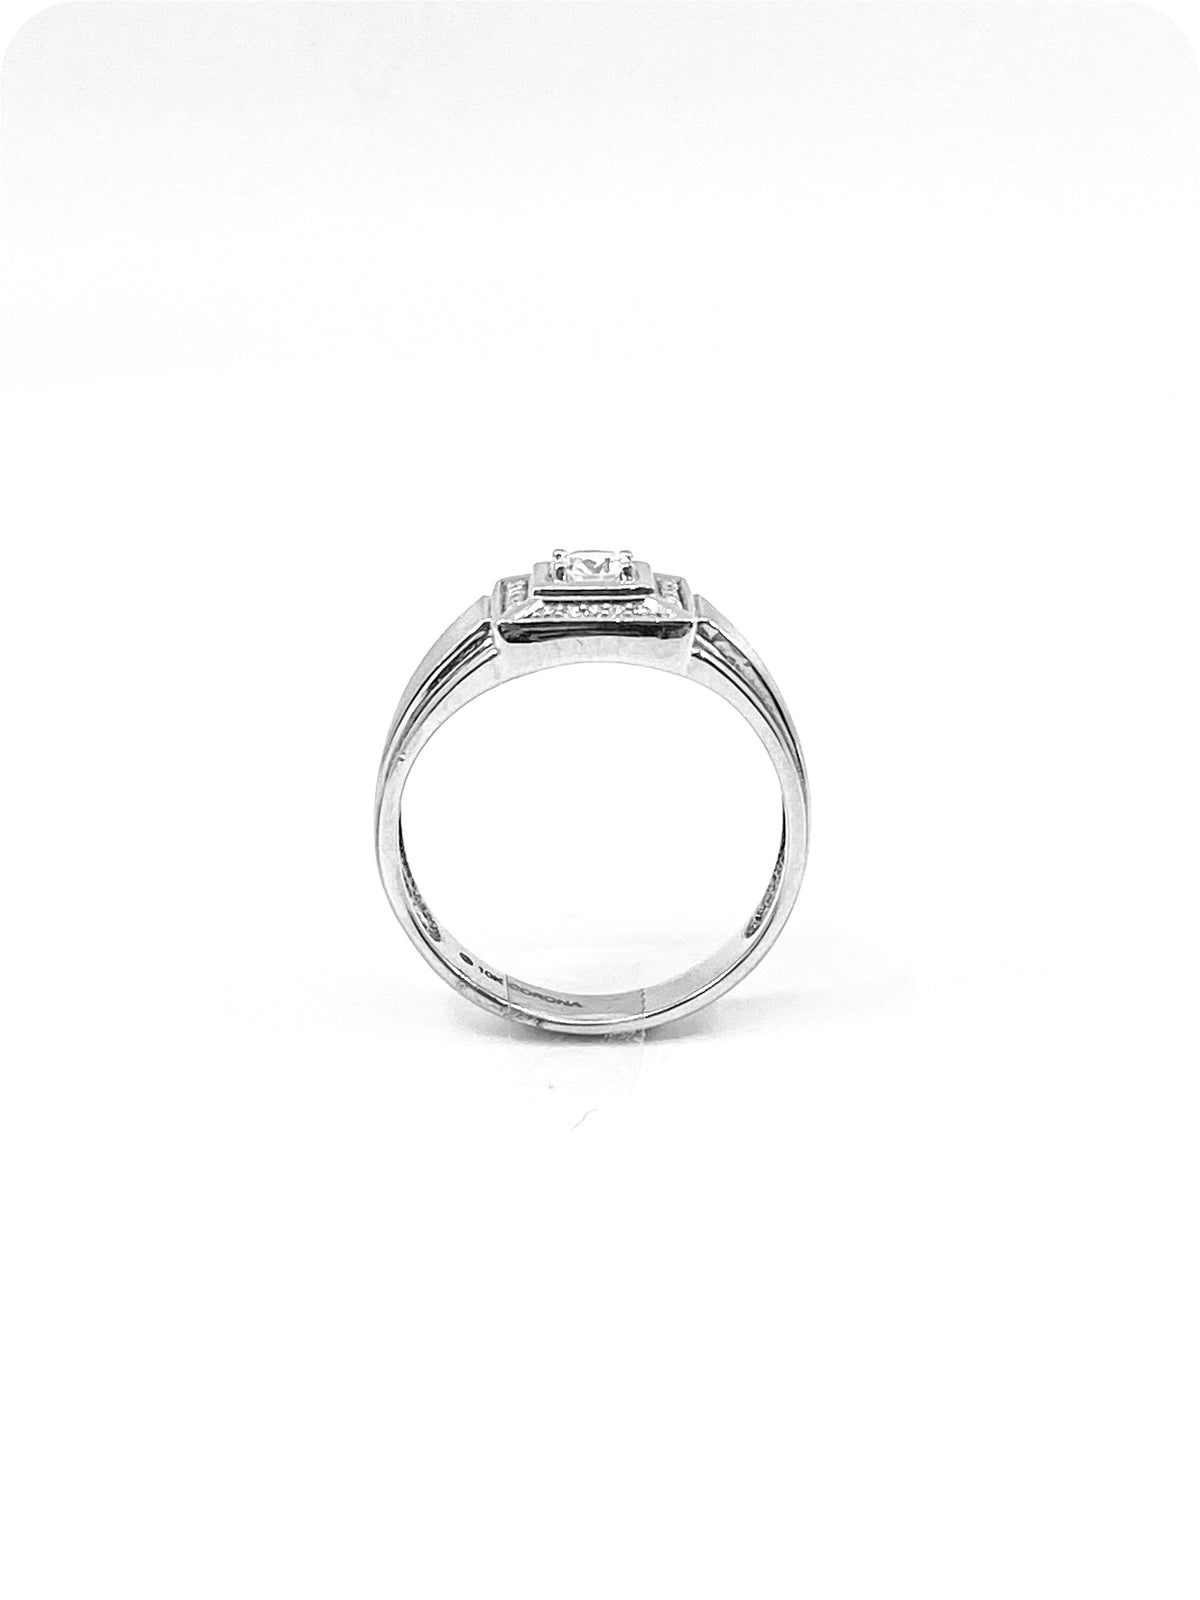 10K White Gold Gents 0.30cttw Canadian Diamond Ring, size 10